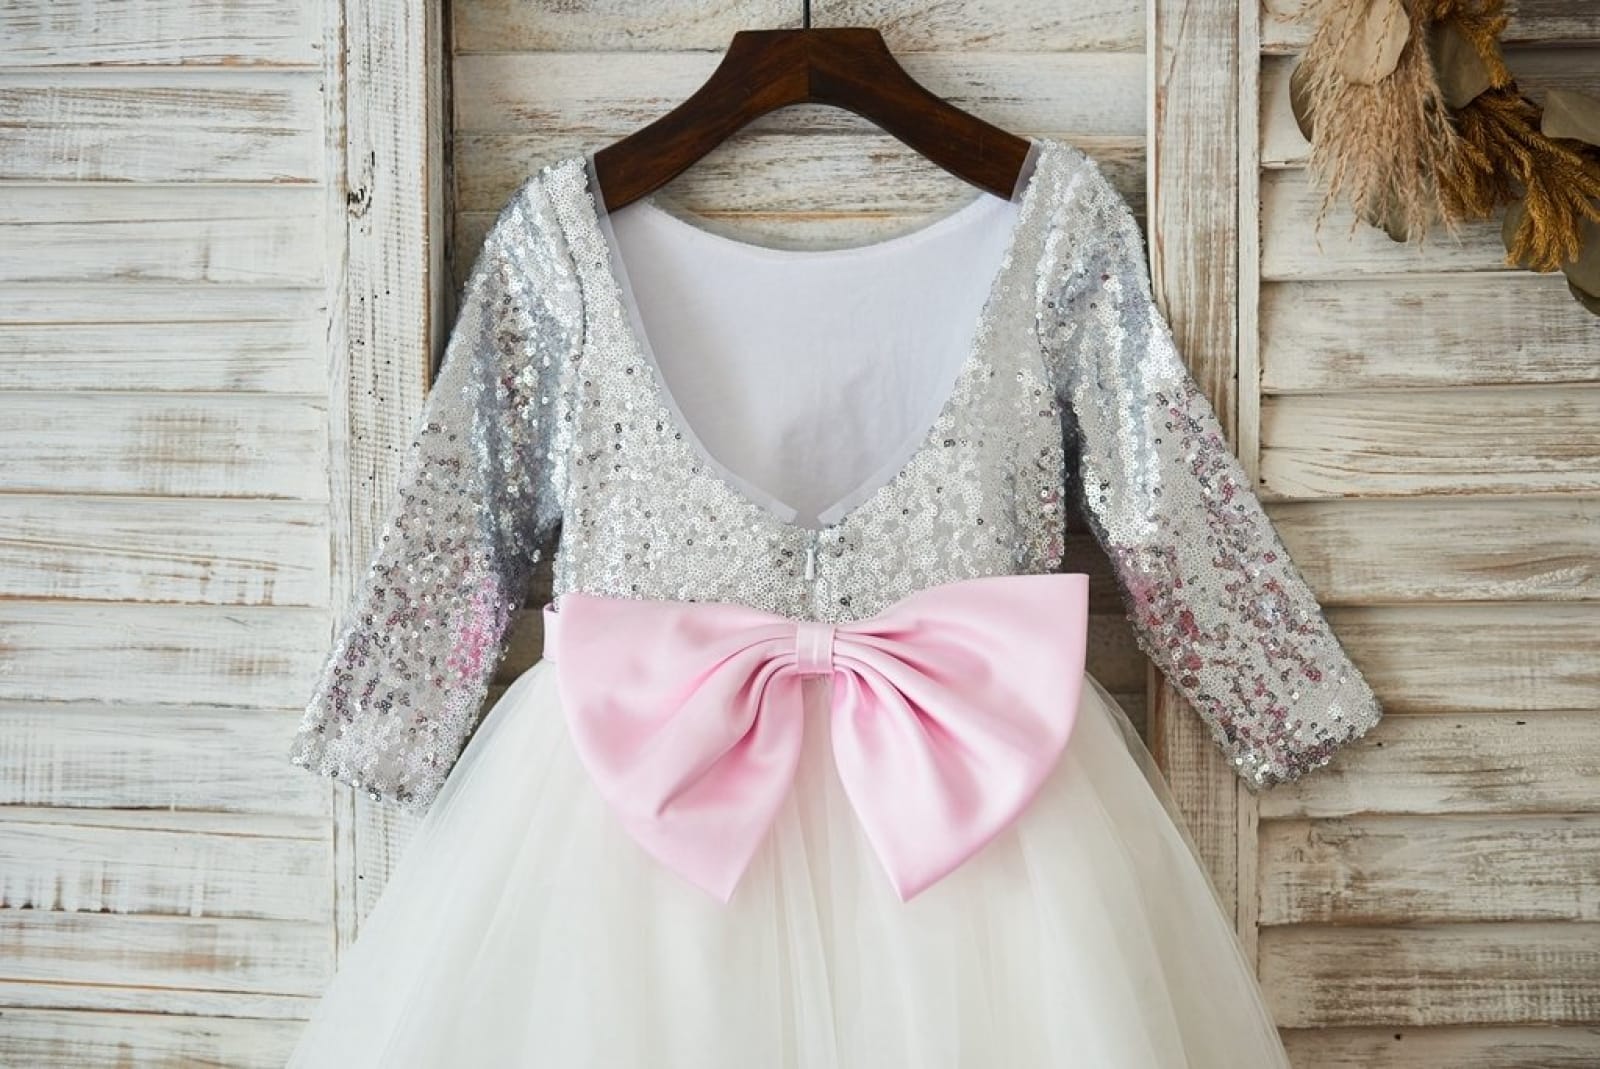 Long Sleeves Silver Sequin Ivory Lace Tulle Wedding Flower Girl Dress